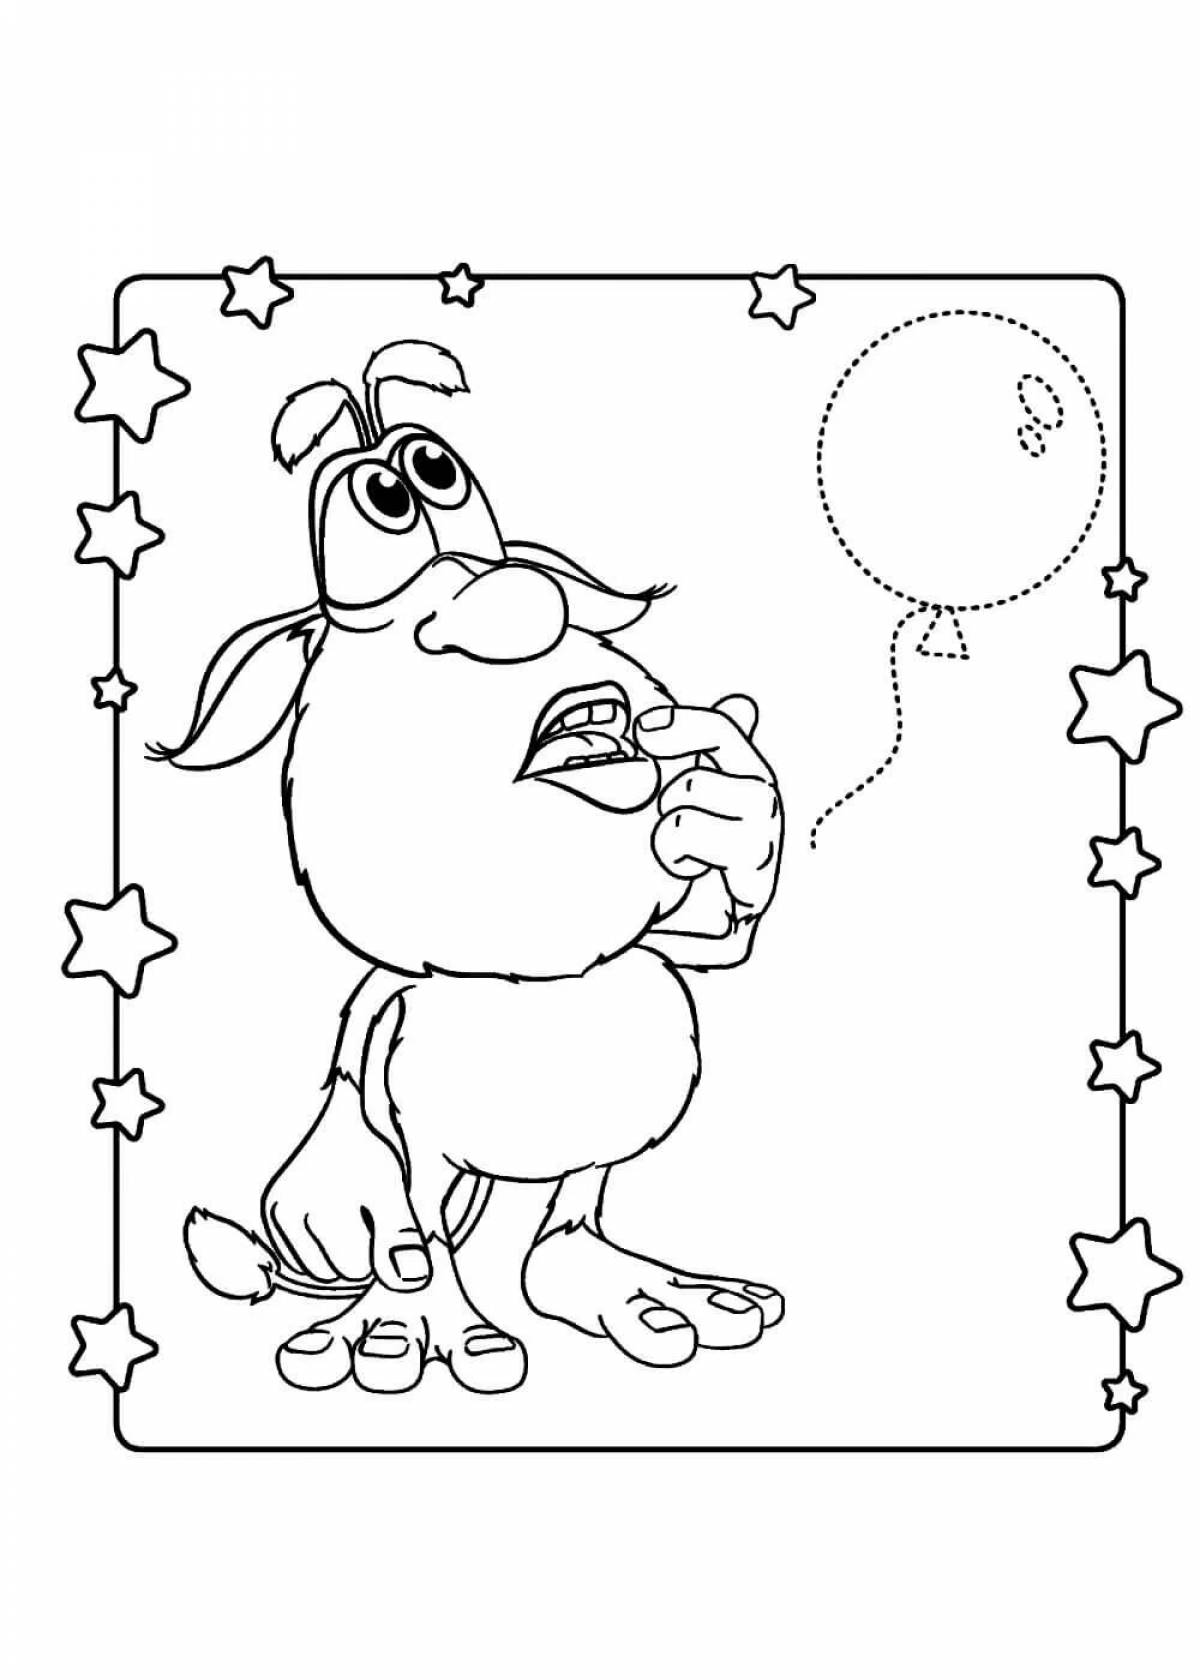 Booba animated coloring game